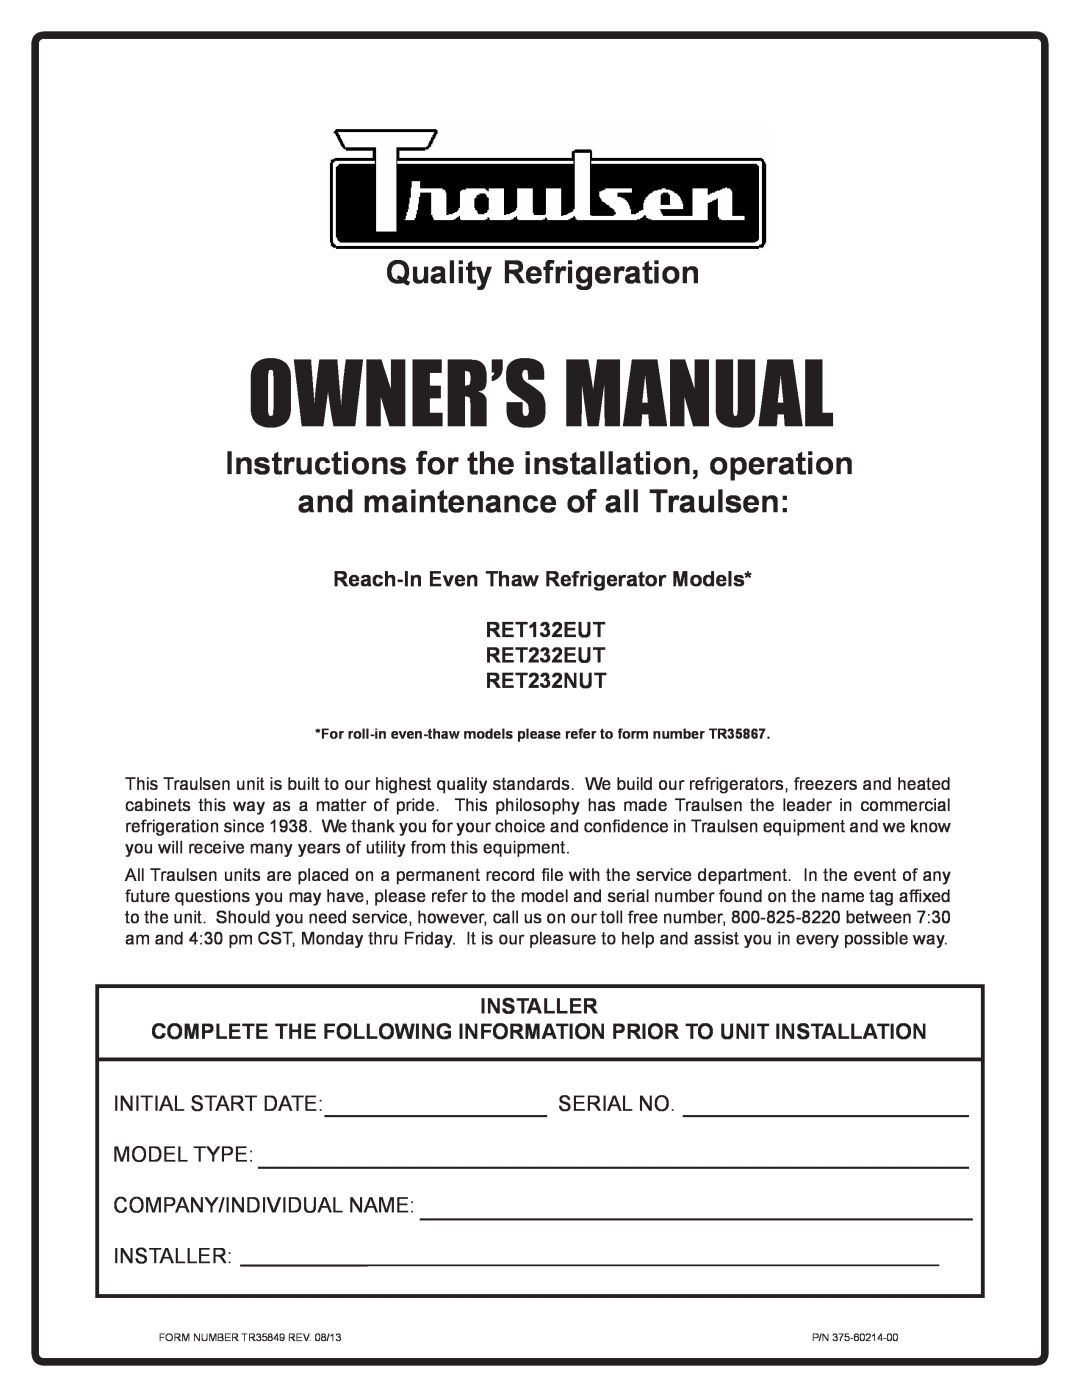 Traulsen RET232NUT, RET232EUT owner manual Initial Start Date, Serial No, Model Type Company/Individual Name Installer 